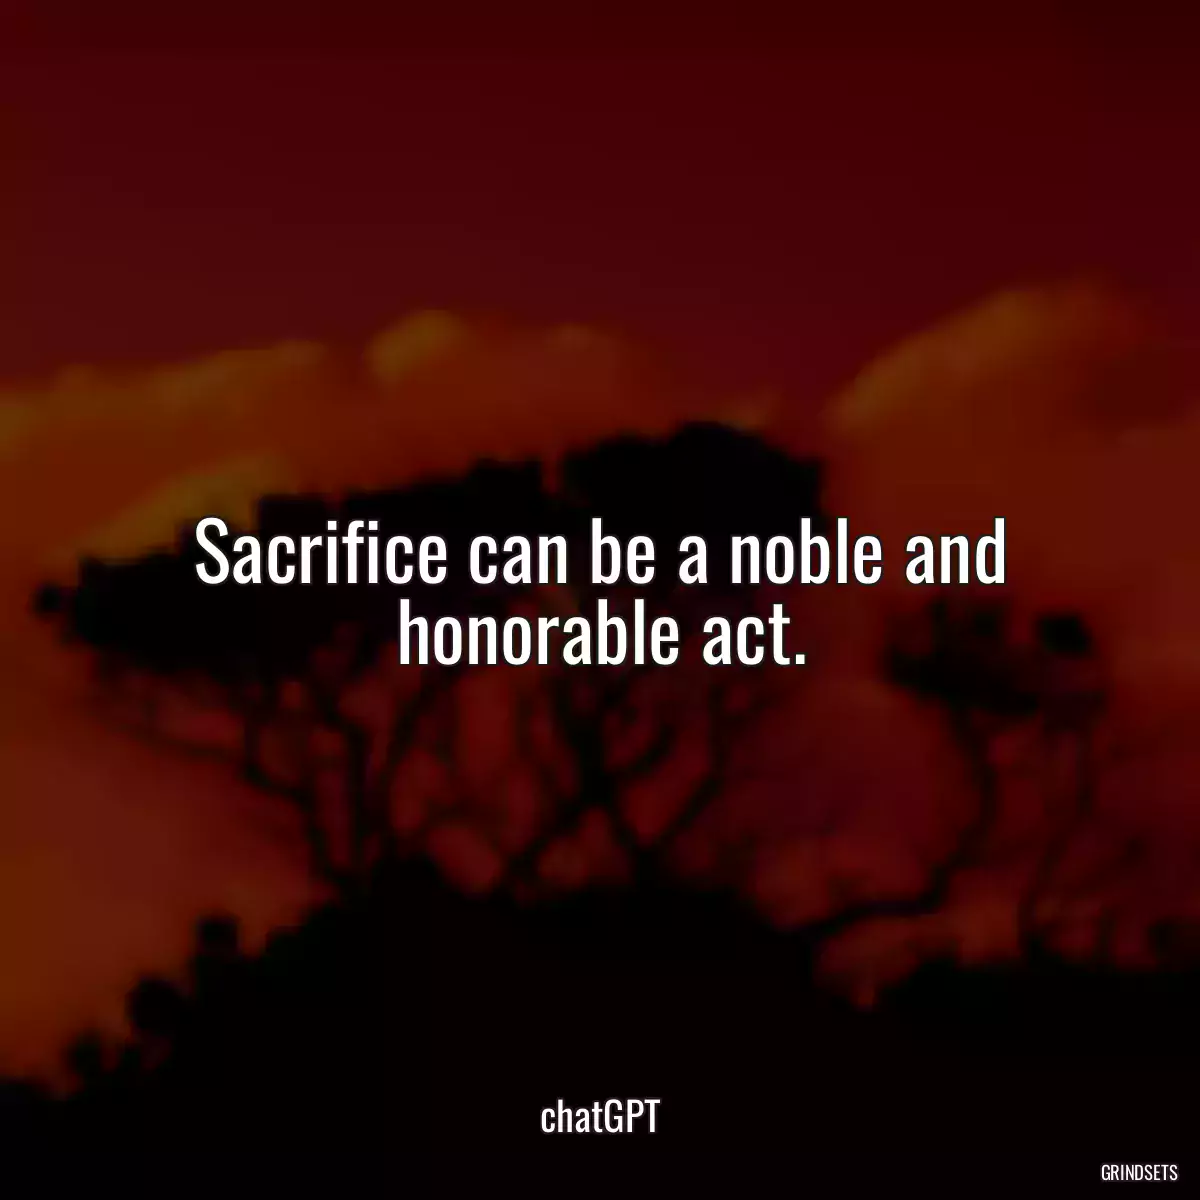 Sacrifice can be a noble and honorable act.